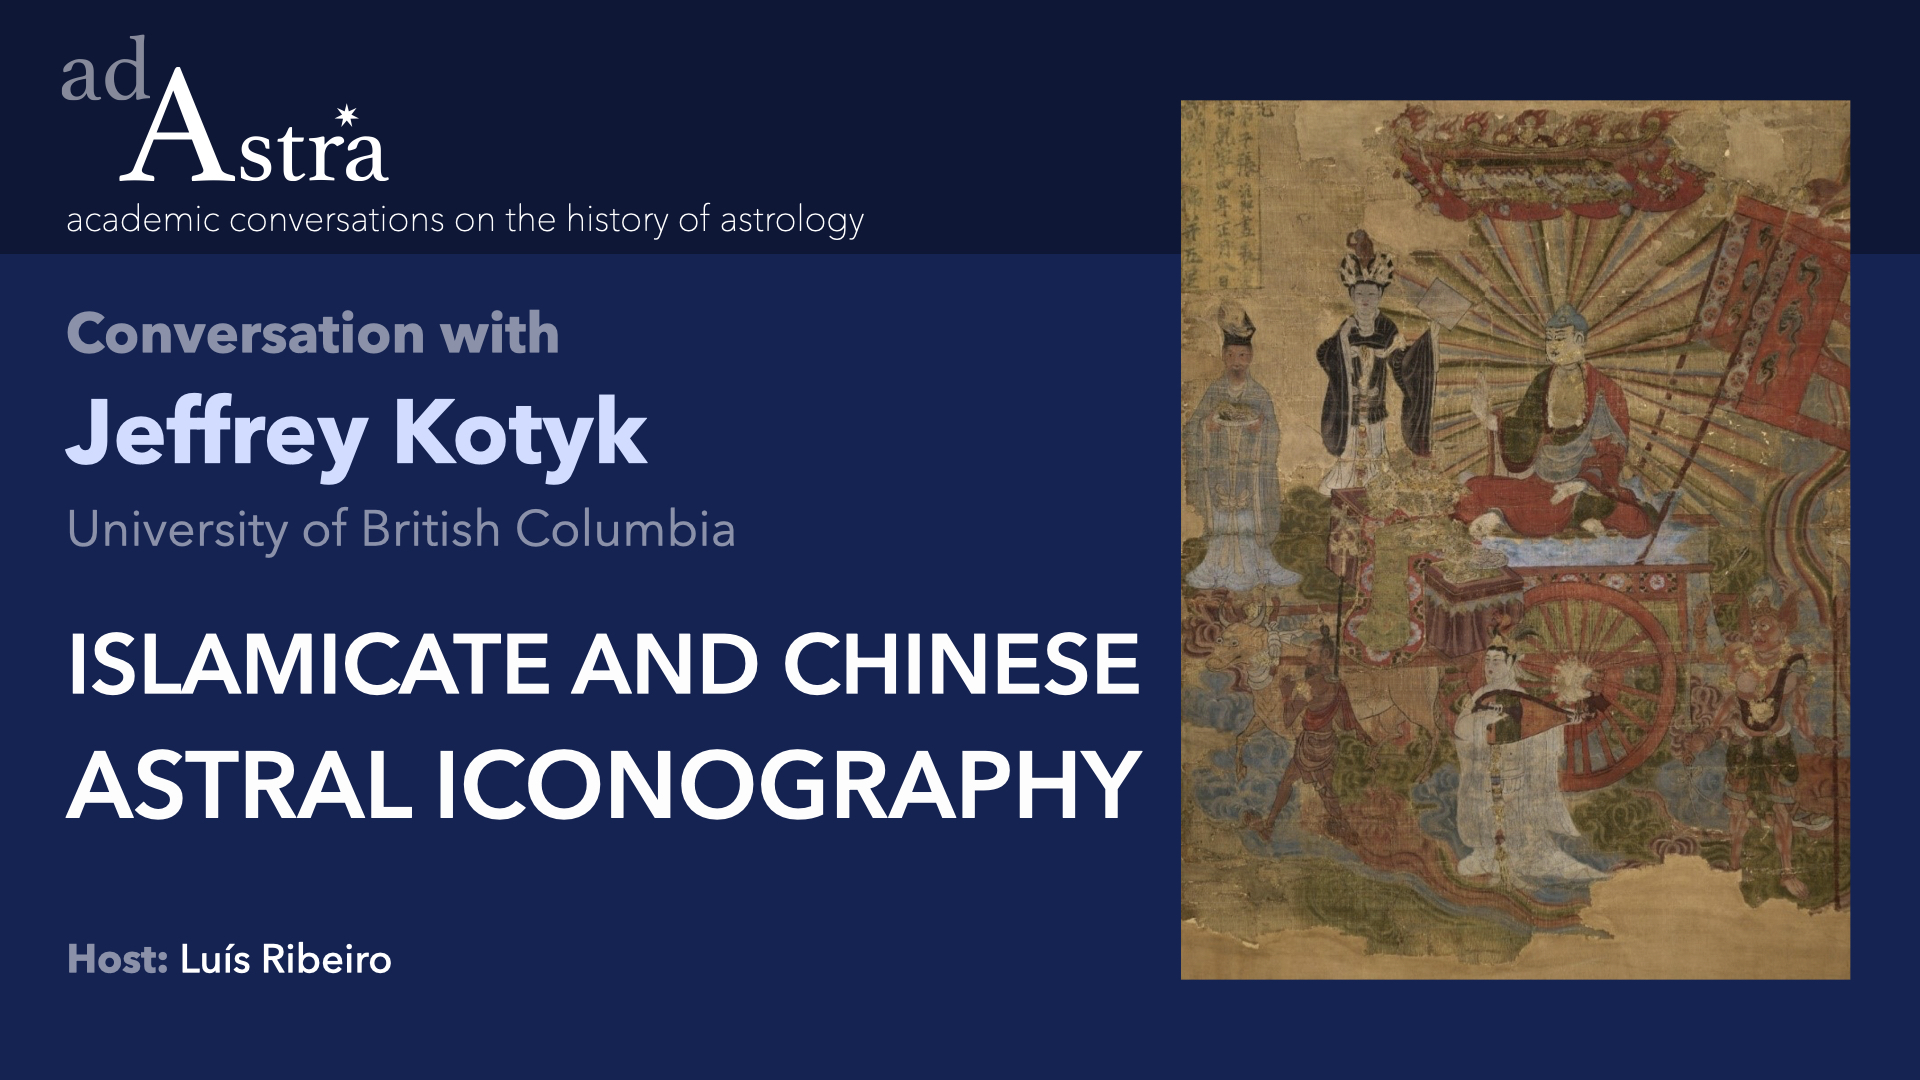 Islamicate and Chinese astral iconography with Jeffrey Kotyk